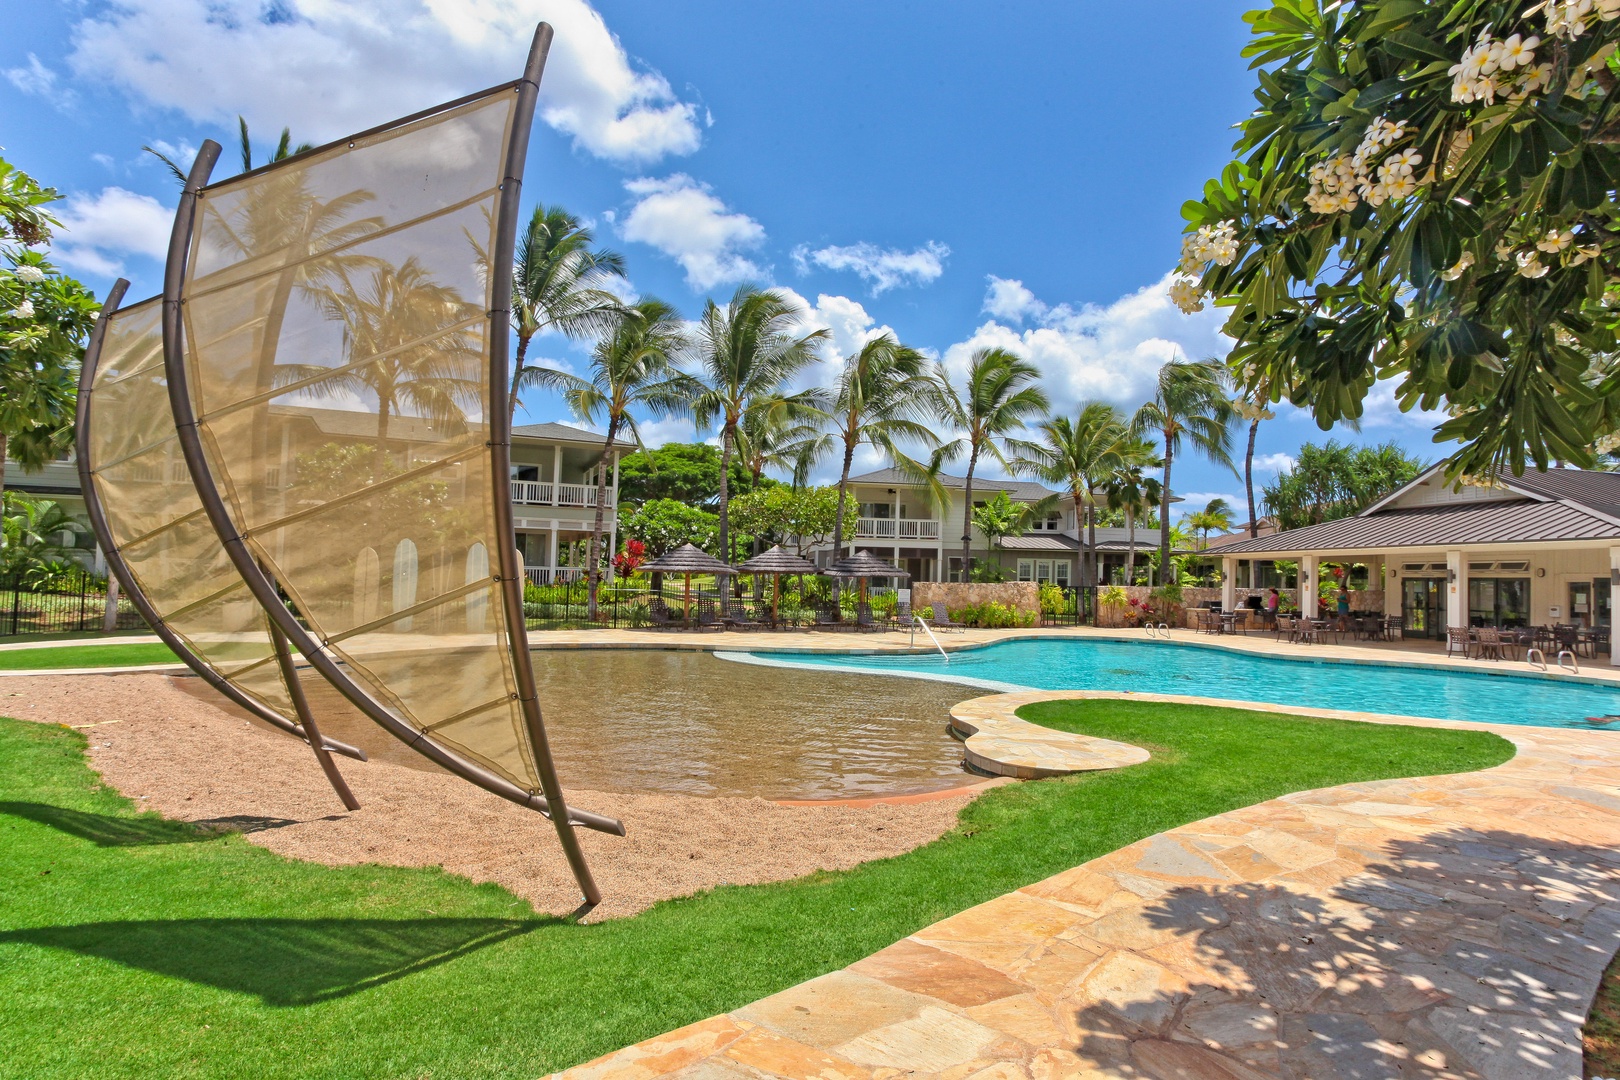 Kapolei Vacation Rentals, Coconut Plantation 1158-1 - Relax by the community pool with your favorite book.